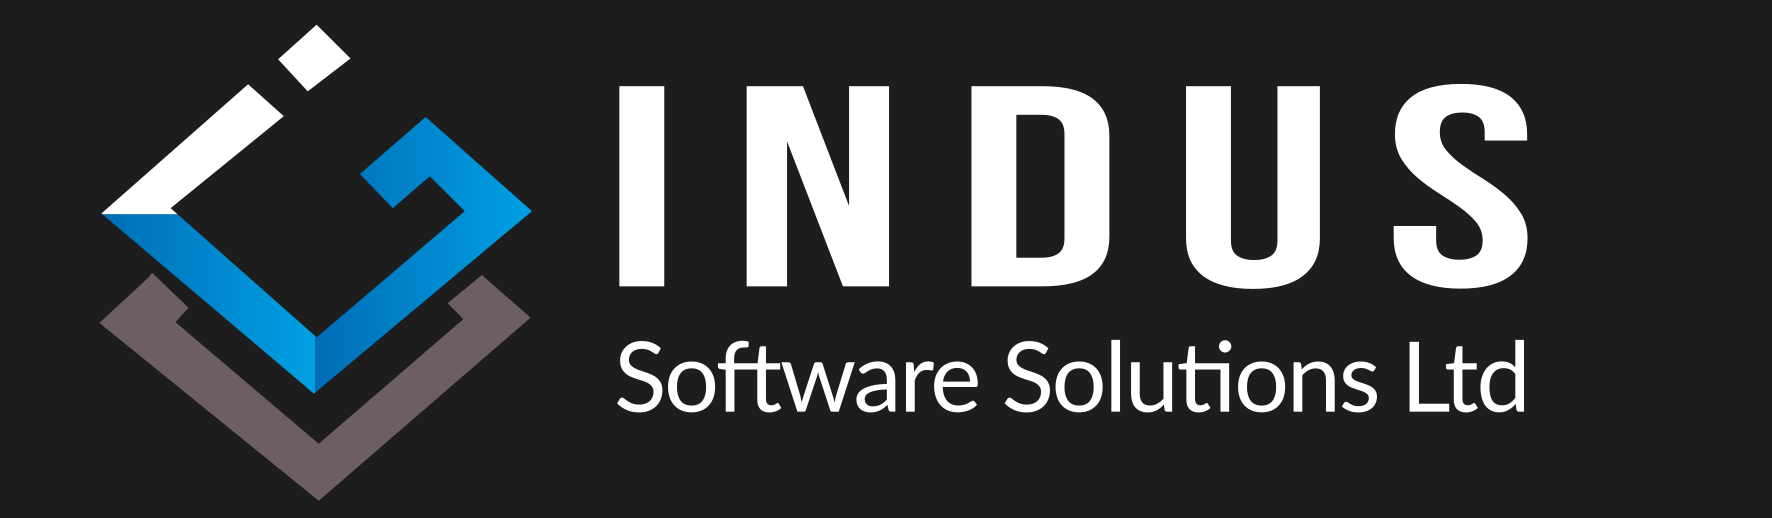 indus software solutions in mauritius